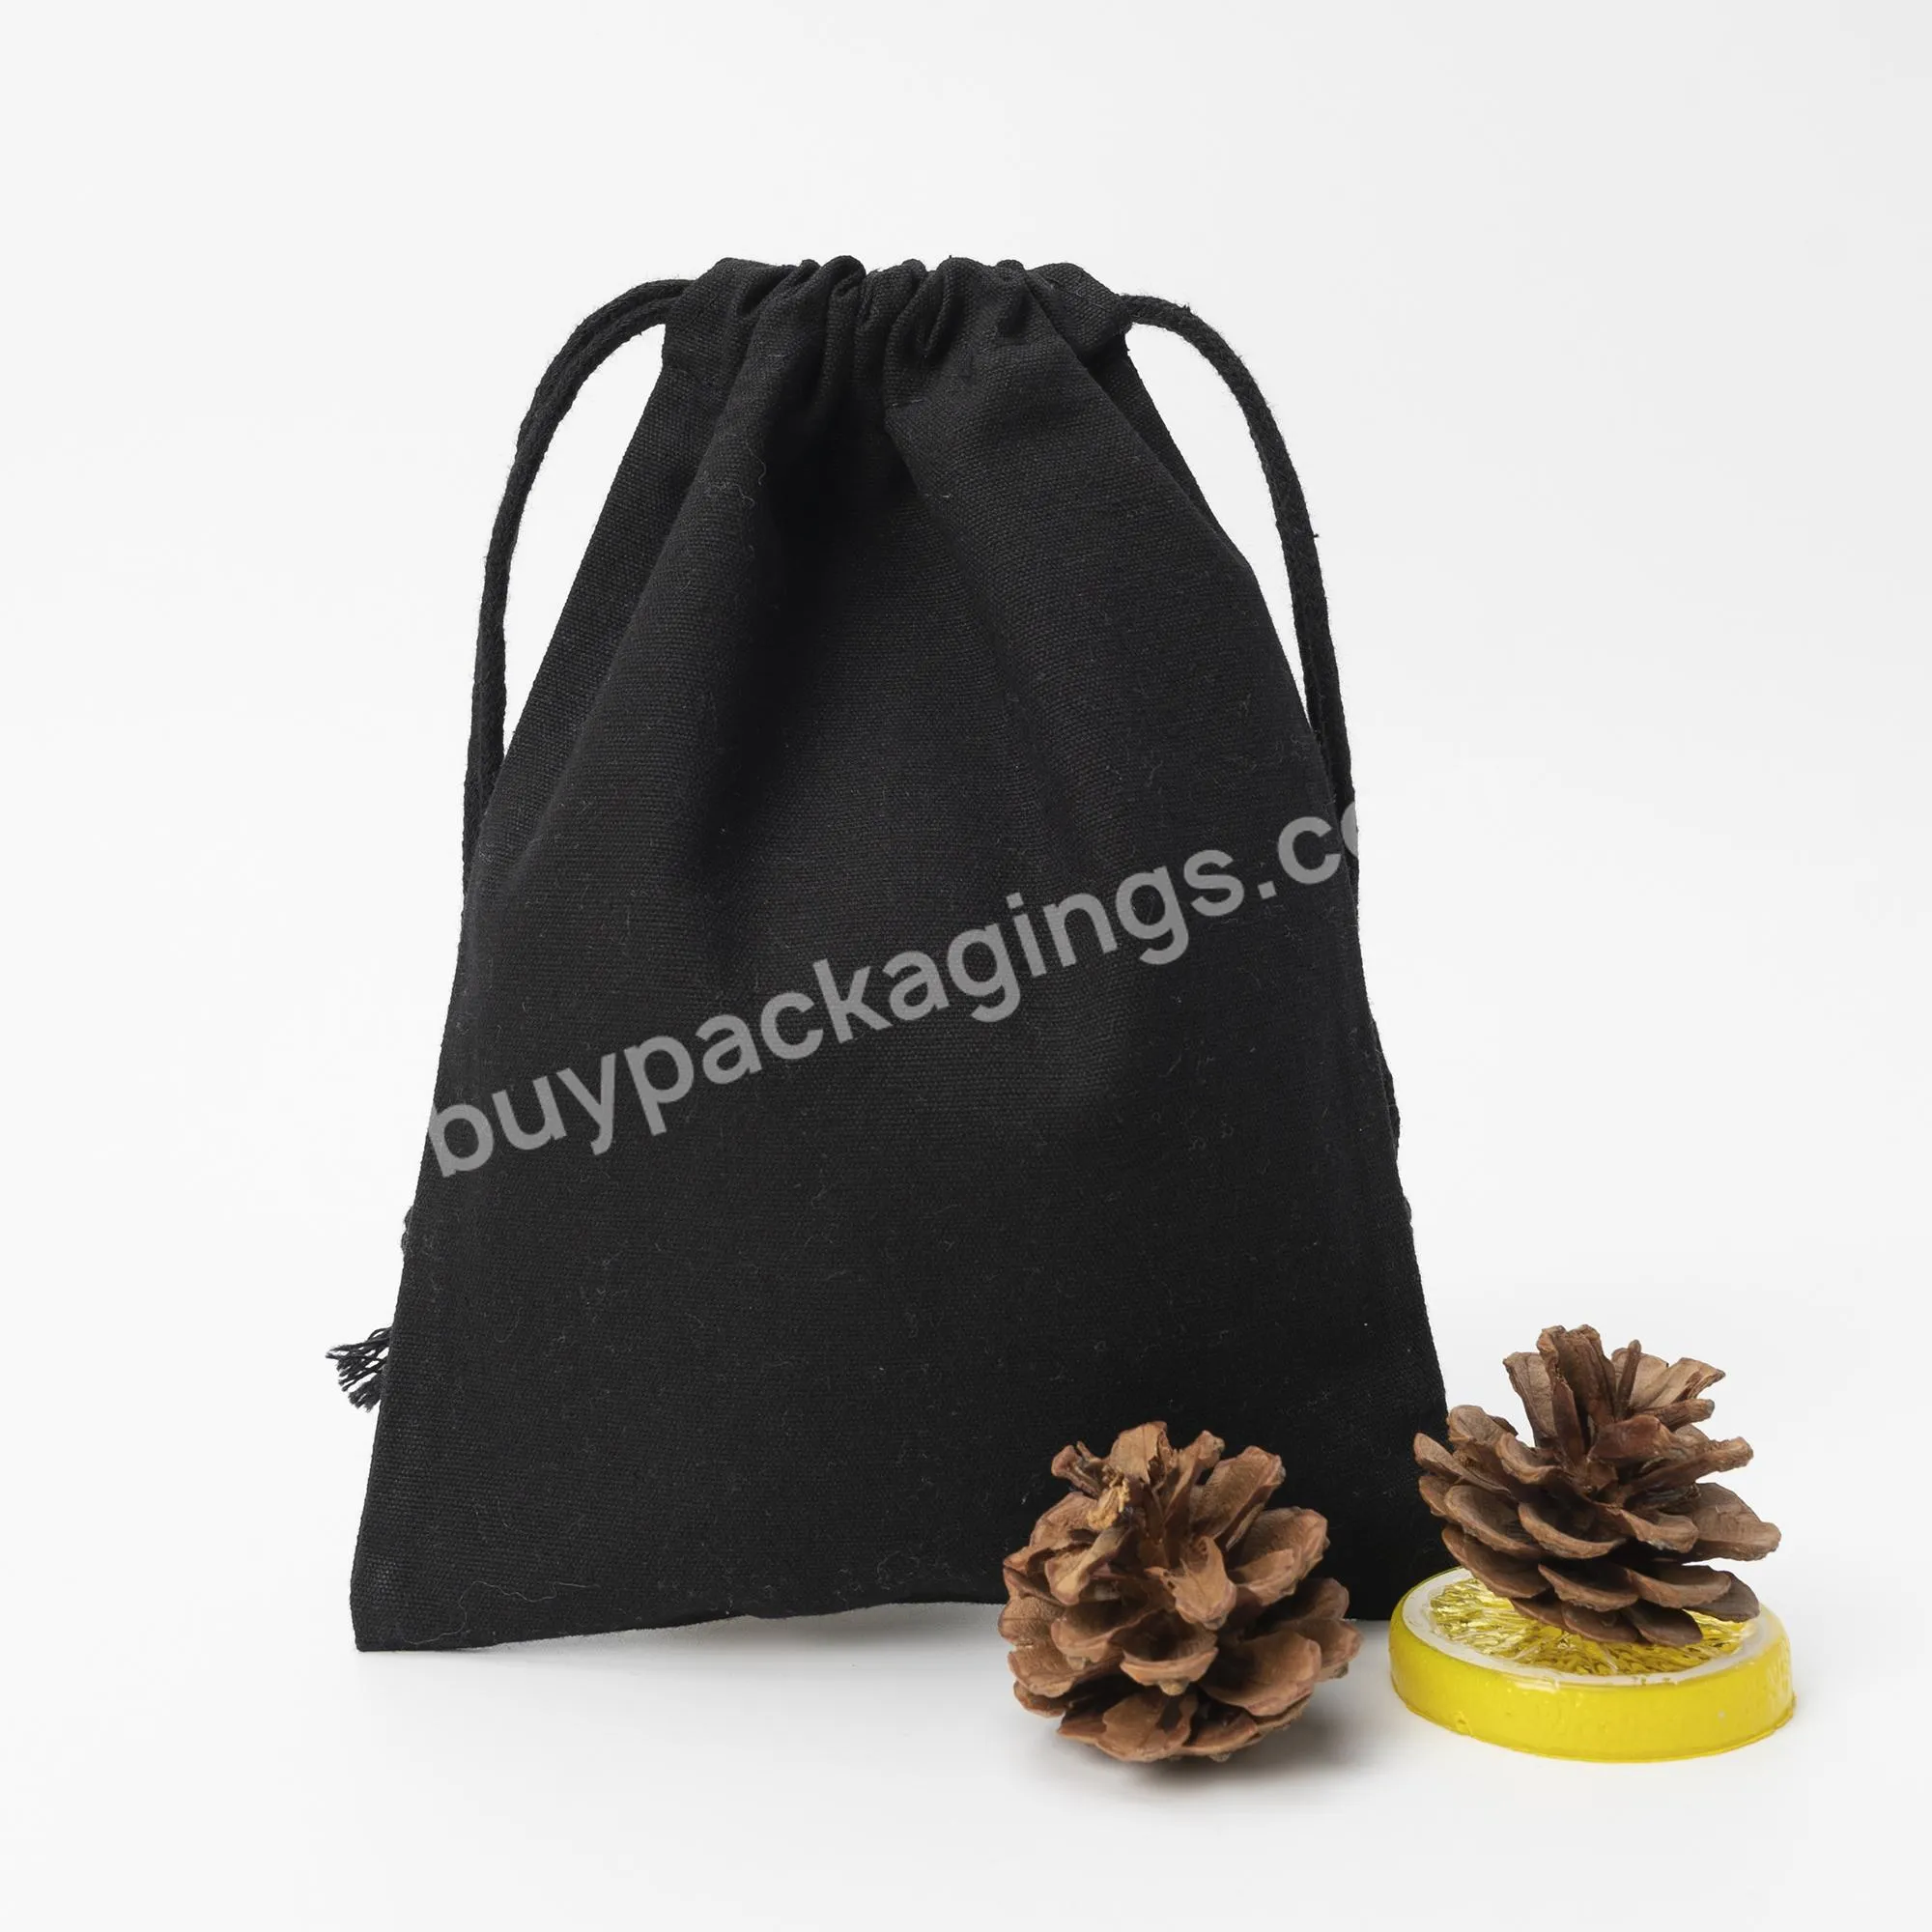 Customized Cotton Canvas Pouch Dust Bag Canvas Drawstring Bag With Logo For Packaging - Buy Organic Cotton Drawstring Bag,Cotton Hand Bag,Cotton Drawstring Bag.